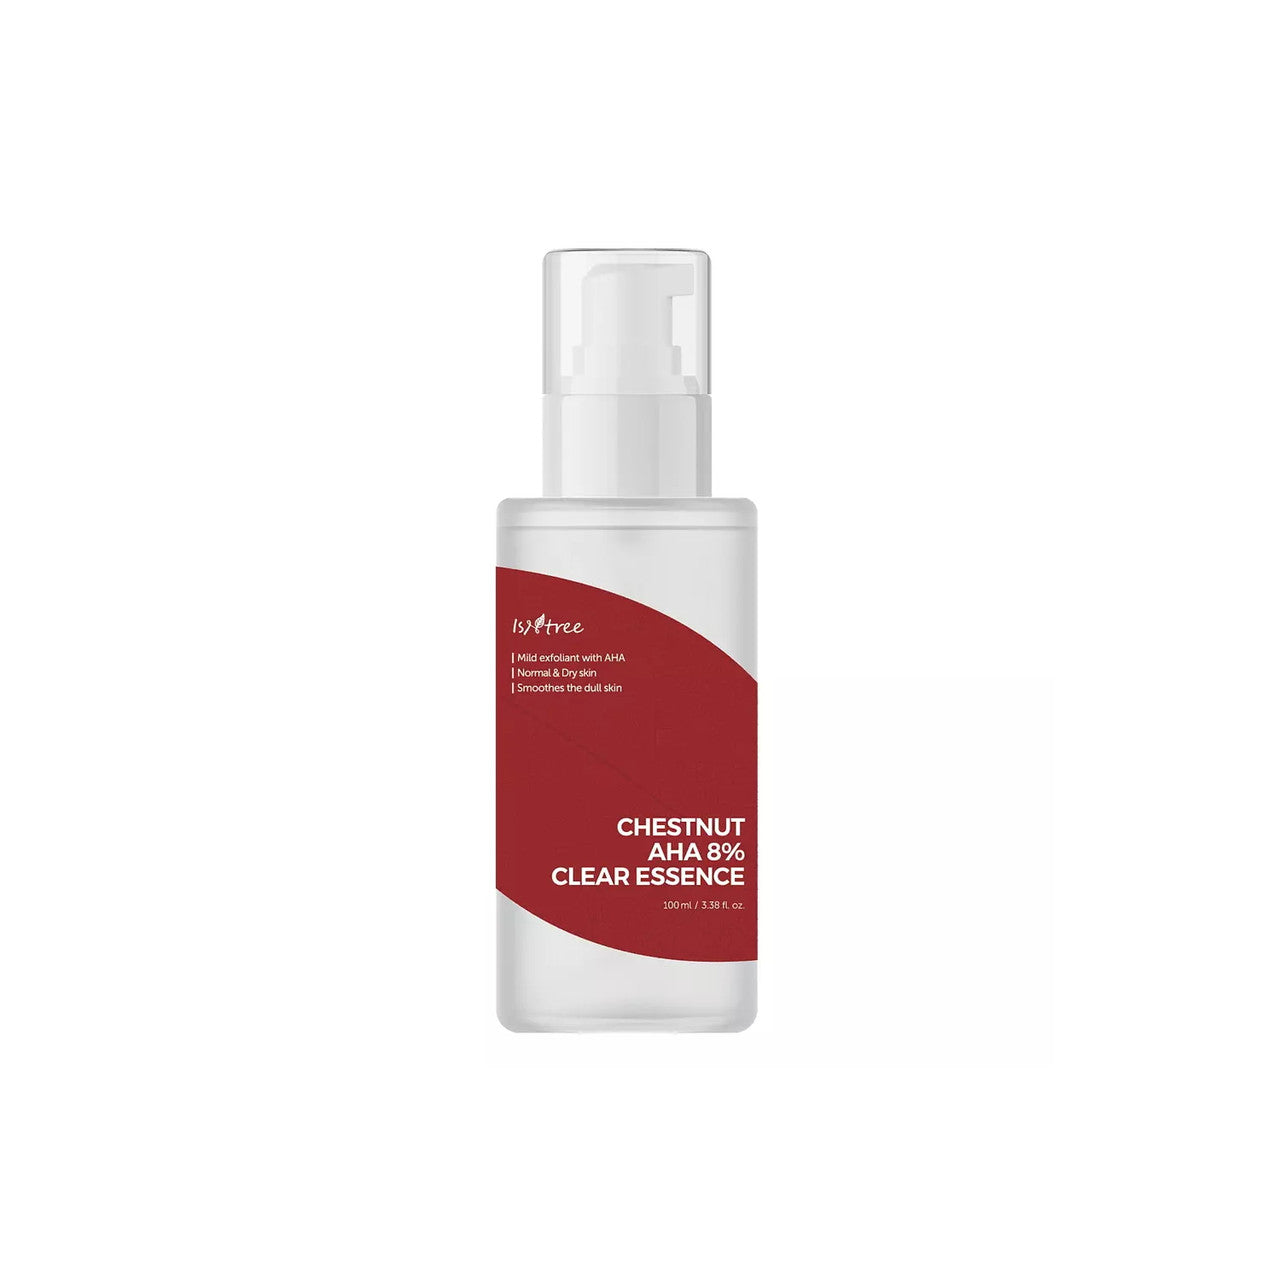 ISNTREE - Chestnut AHA 8% Clear Essence (Discounted)